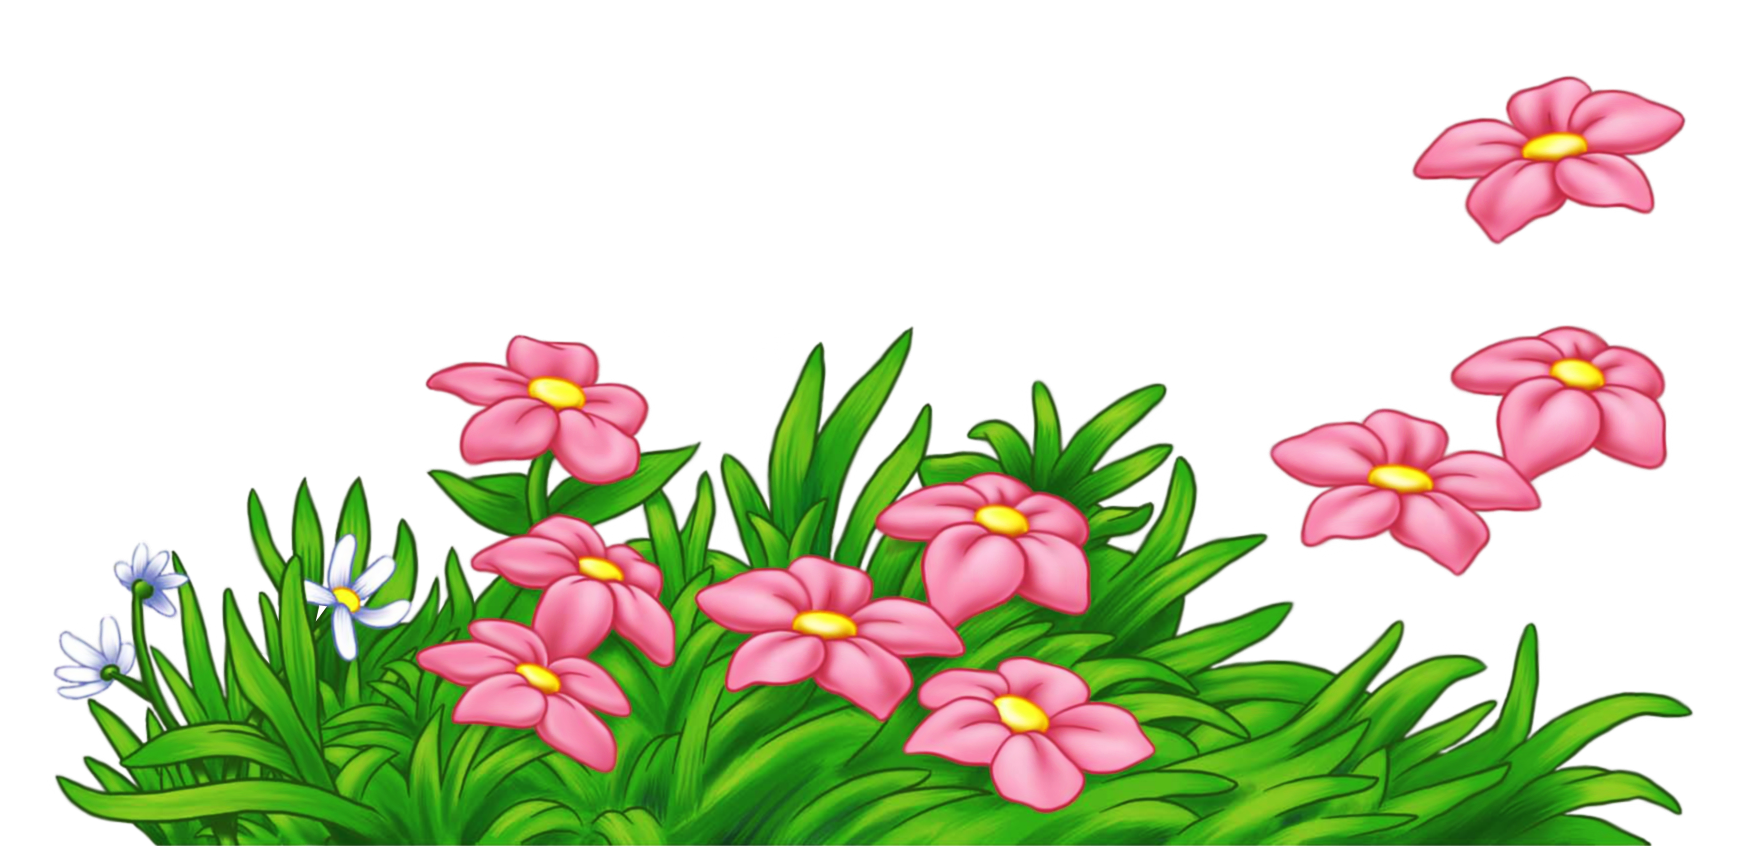 Youtube clipart flower. Grass with pink flowers